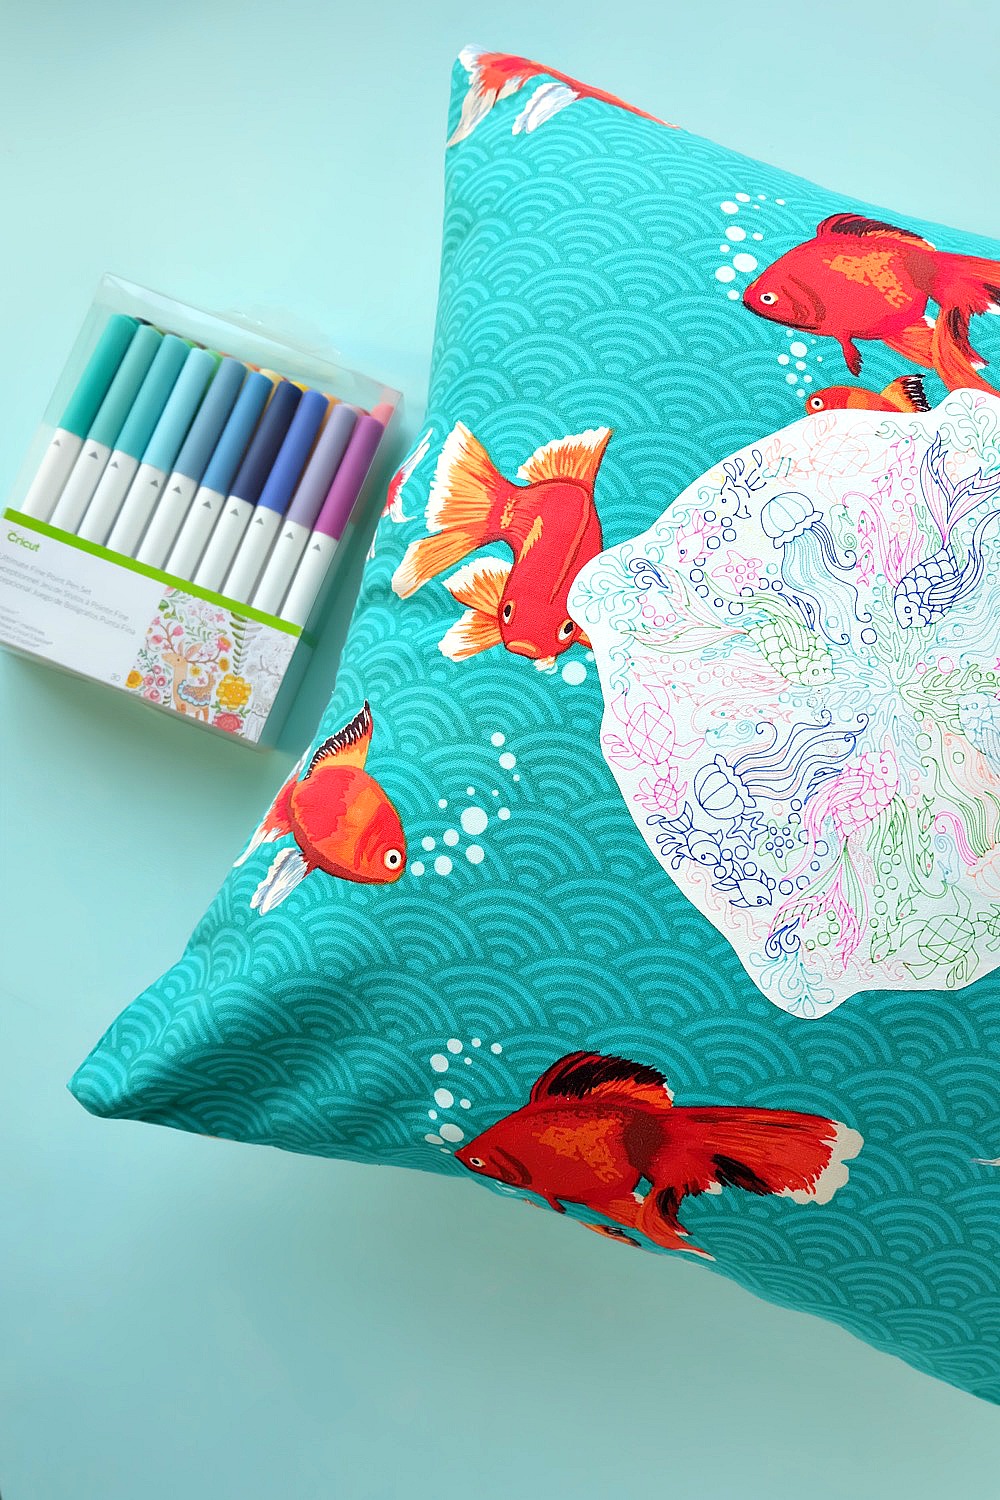 Create a gorgeous DIY Rainbow Under the Sea Pillow using your Cricut Explore to draw a coloring page design on printable heat transfer vinyl! This is an easy project that makes bright and colorful handmade gift idea. Includes instructions on how to sew an envelope style throw pillow cover. #CricutMade